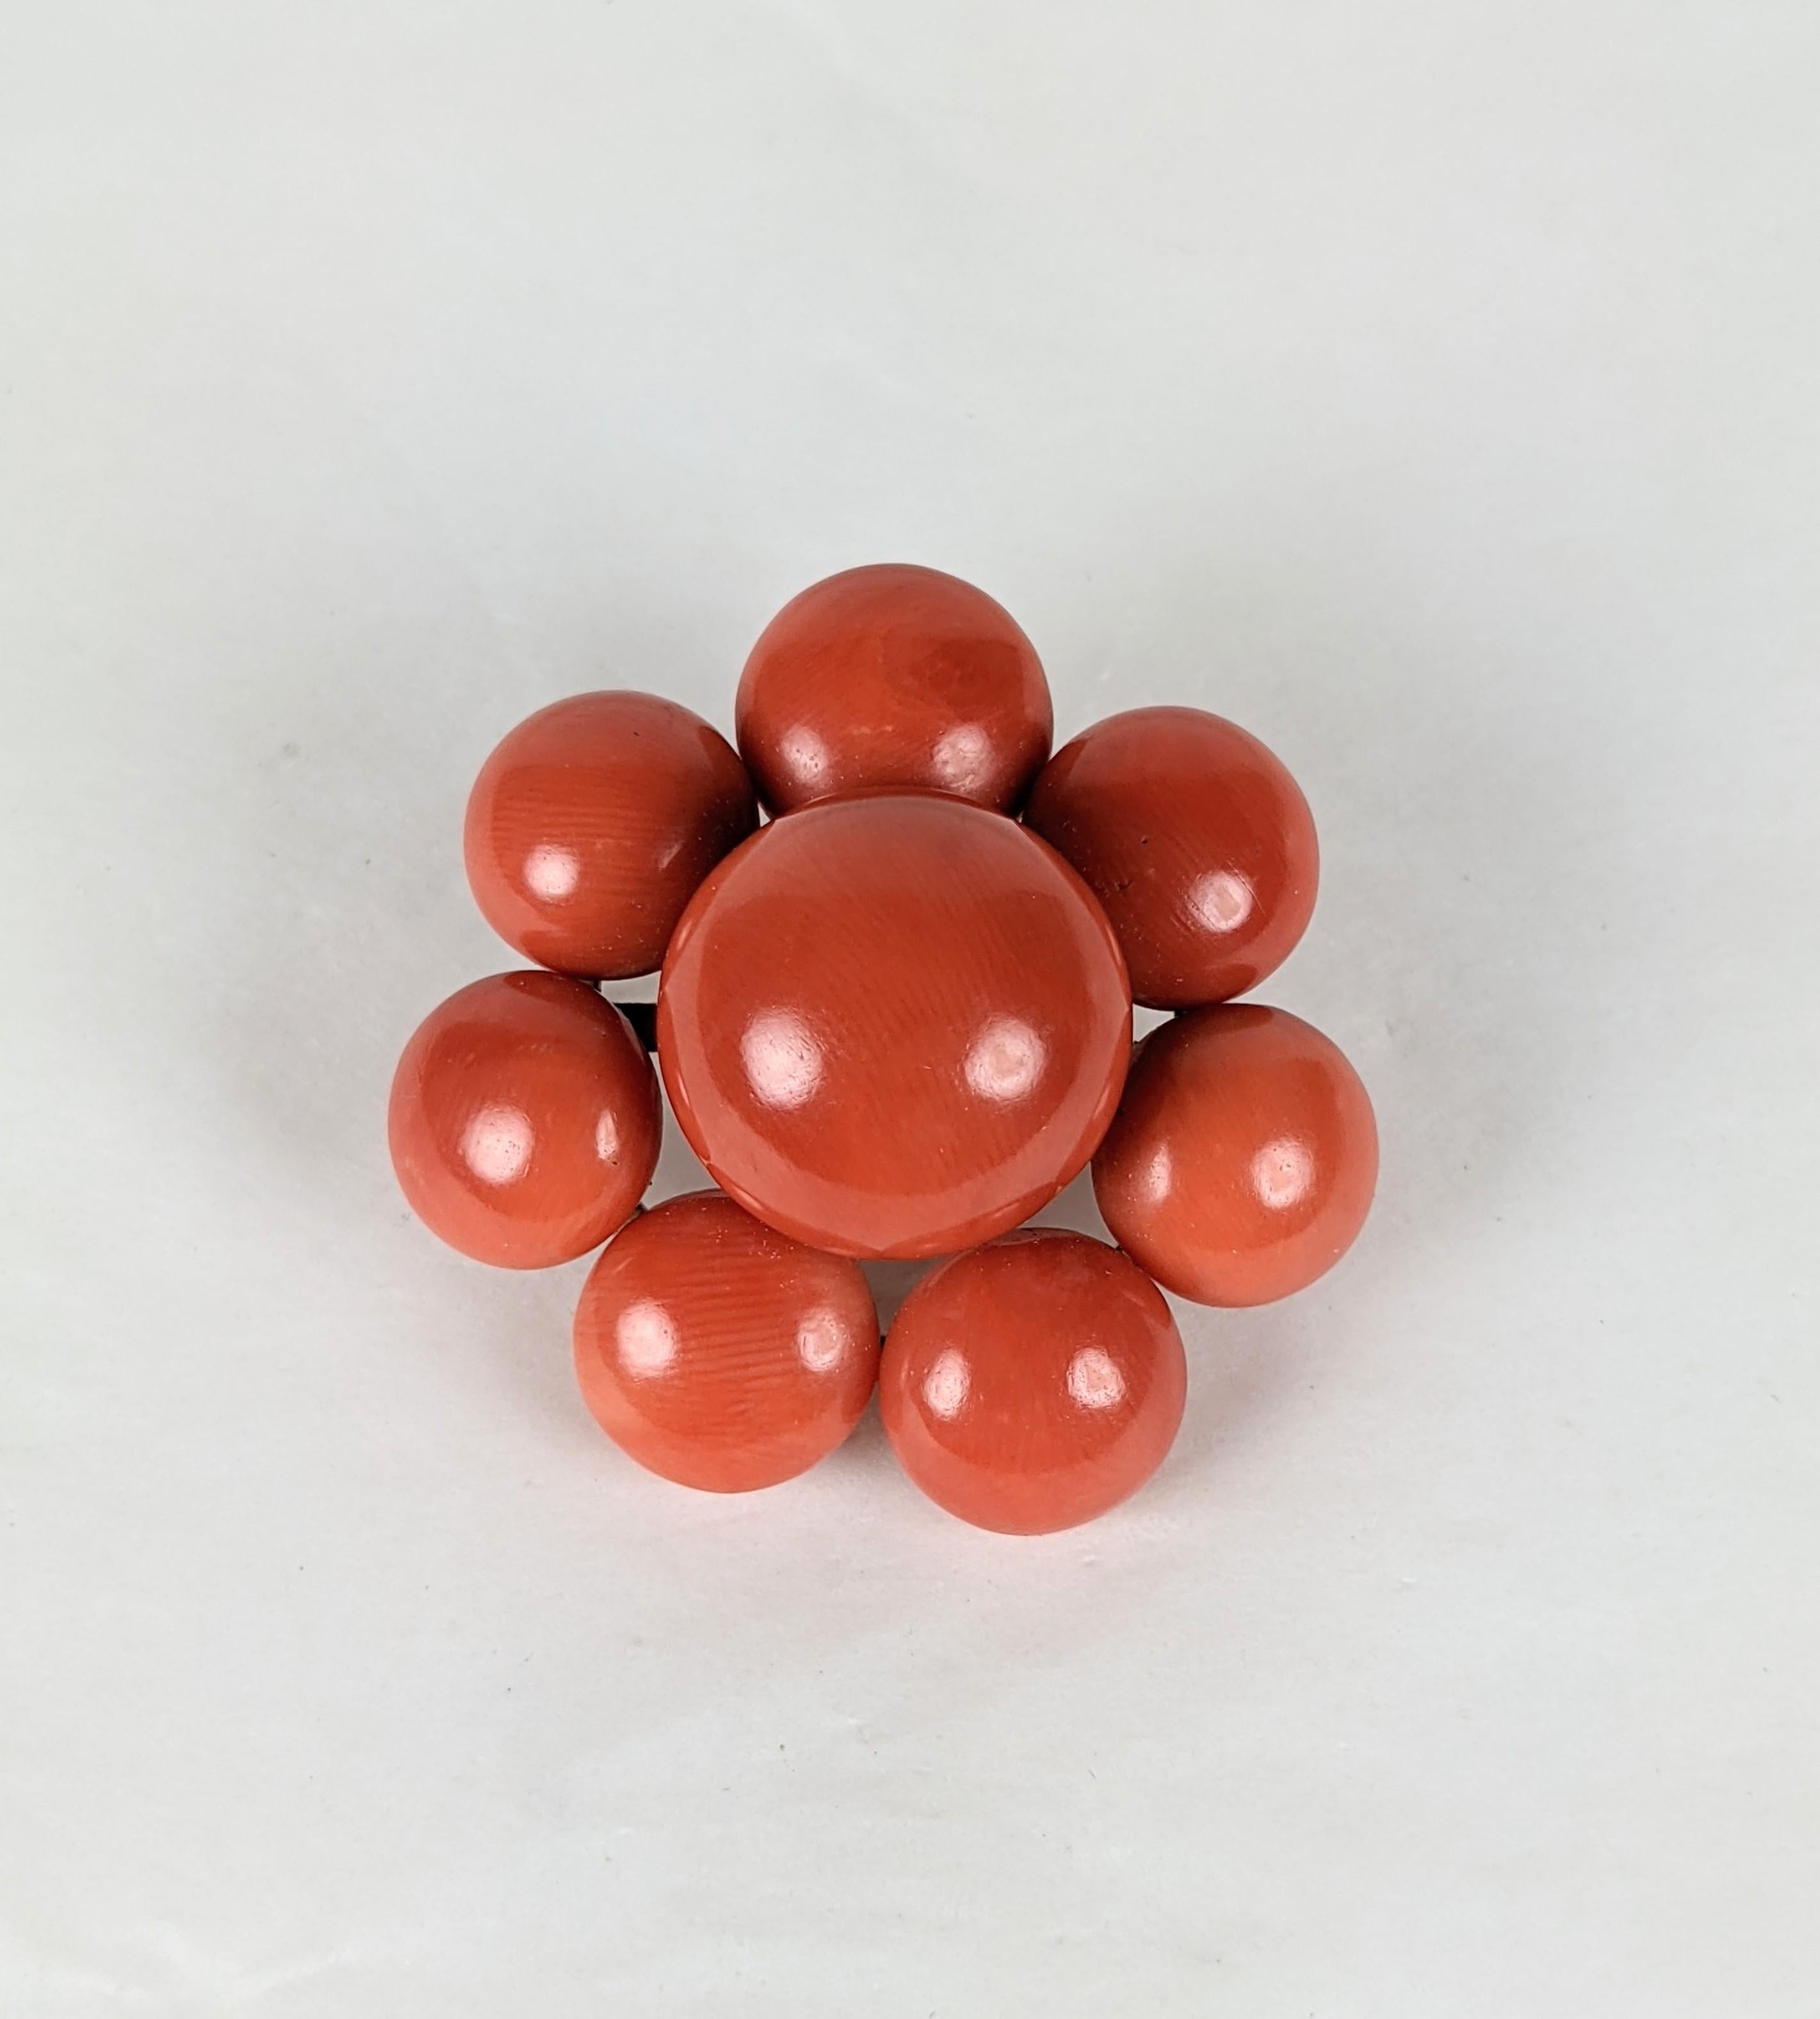 Lovely Victorian Coral Button Brooch of beautifully matched coral buttons from the late 19th Century. Wonderful coral color, Gilt metal. 1880's Italy. 1.5